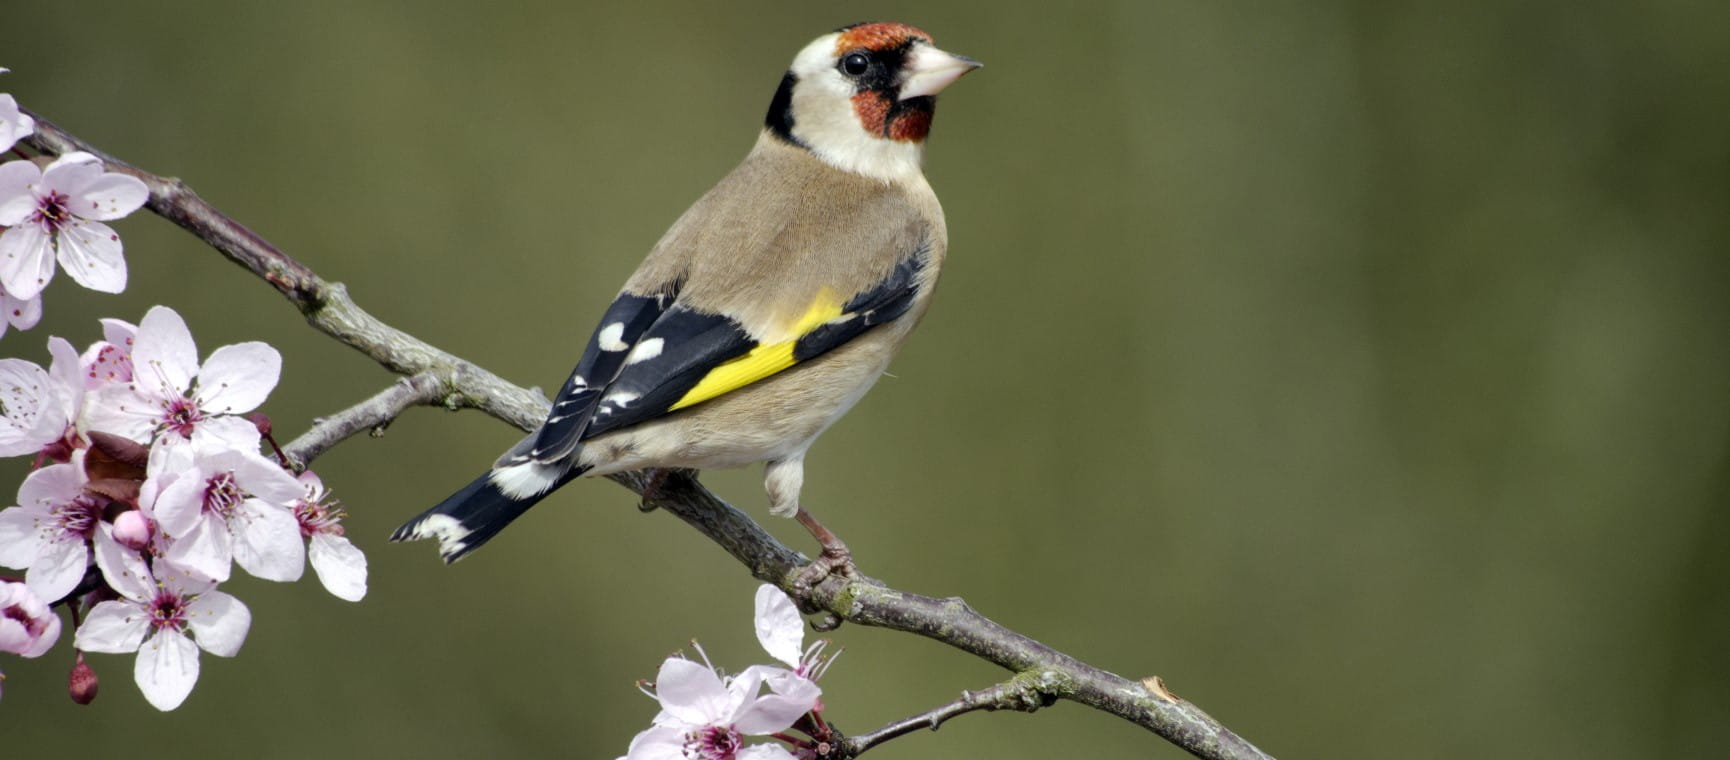 Goldfinch, Carduelis carduelis, single bird on blossom | Getty/MikeLane45